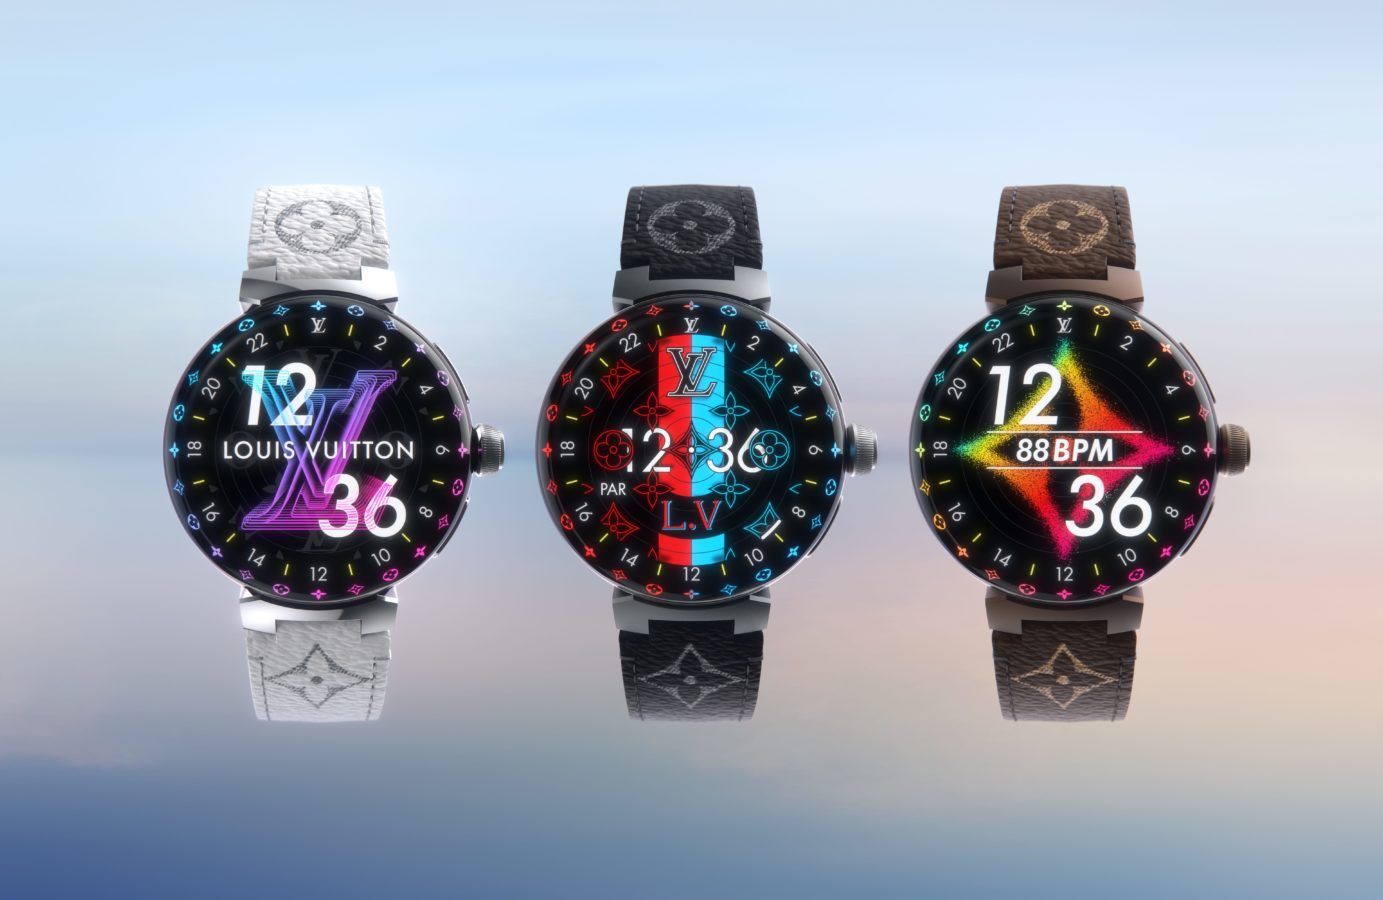 Louis Vuitton lights the way with its new kaleidoscopic smartwatch